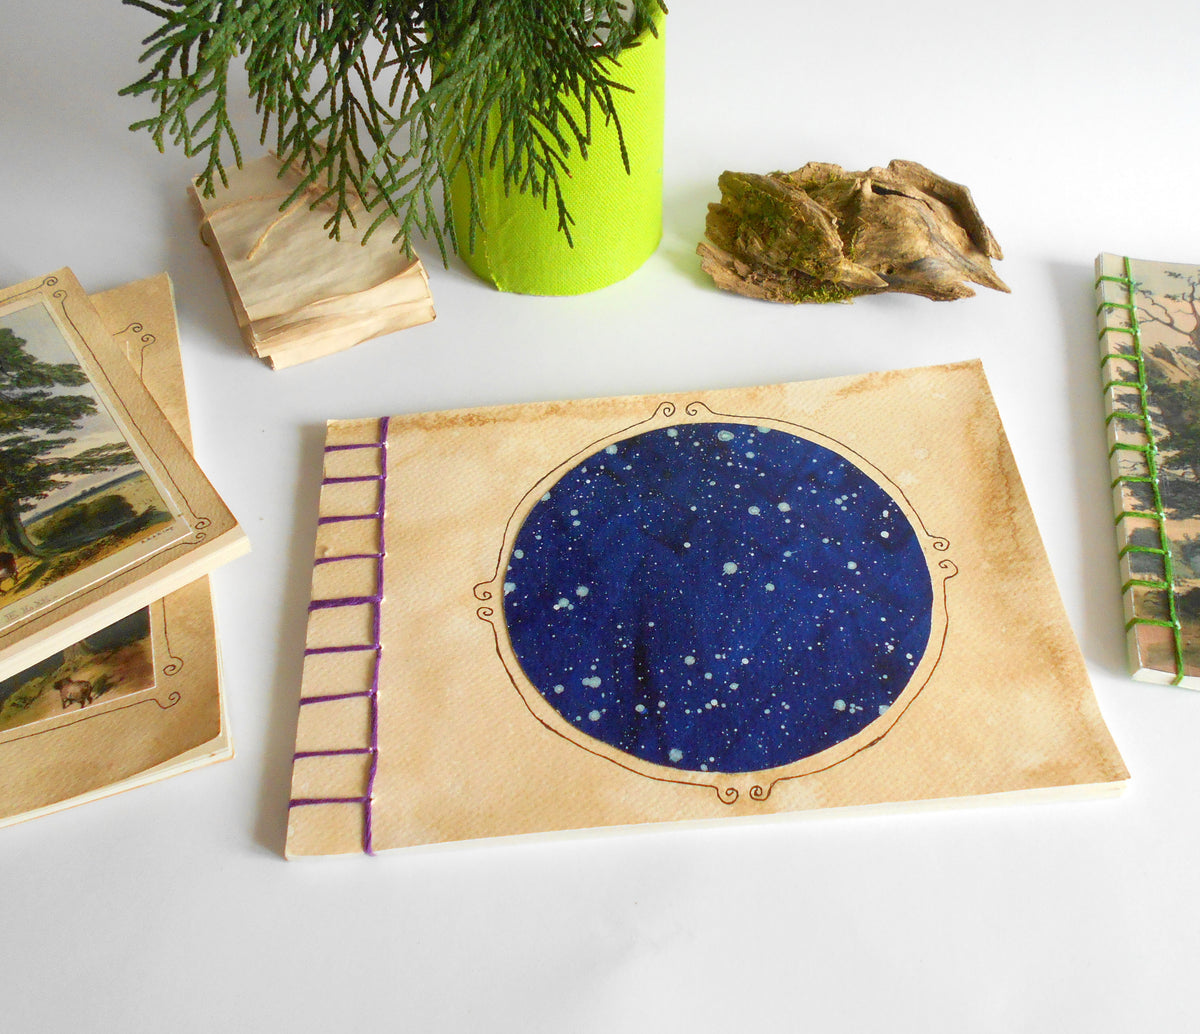 Travel journal with Star Sky handmade art- stab binding and soft covers- custom Hemp cord color- handmade sketchbook with 100% recycled pages- Eco-friendly Inactive